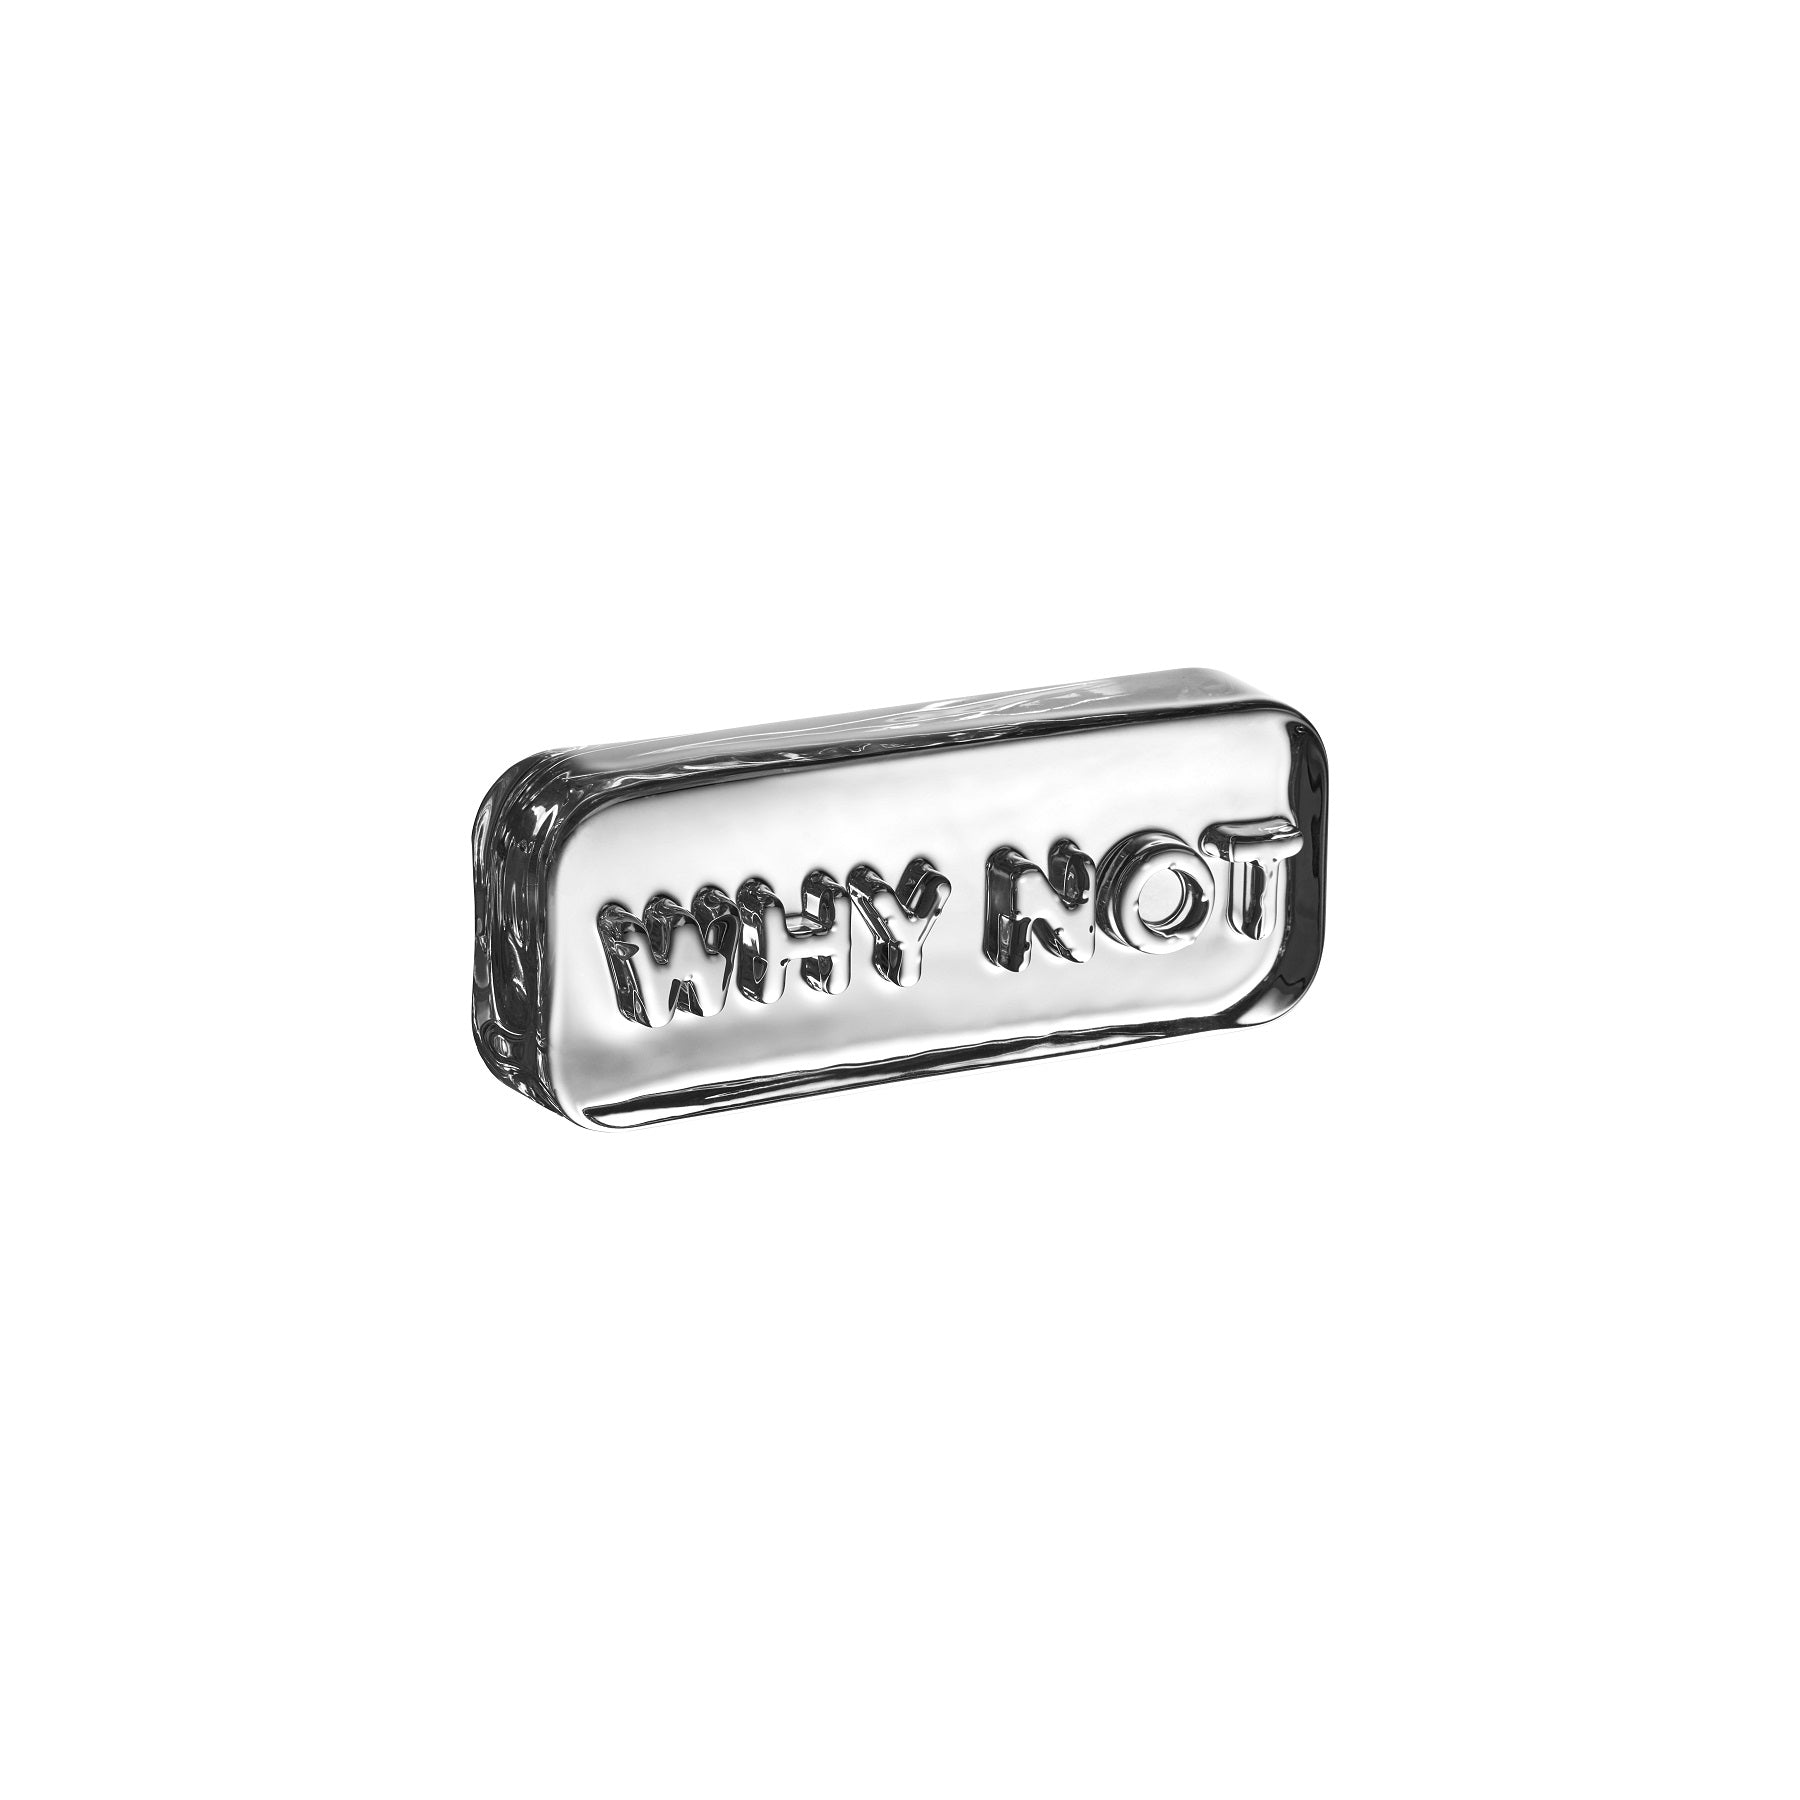 Nude Paroles "Why Not" Paperweight 6 1/2" x 2 1/2" x 1 1/2"